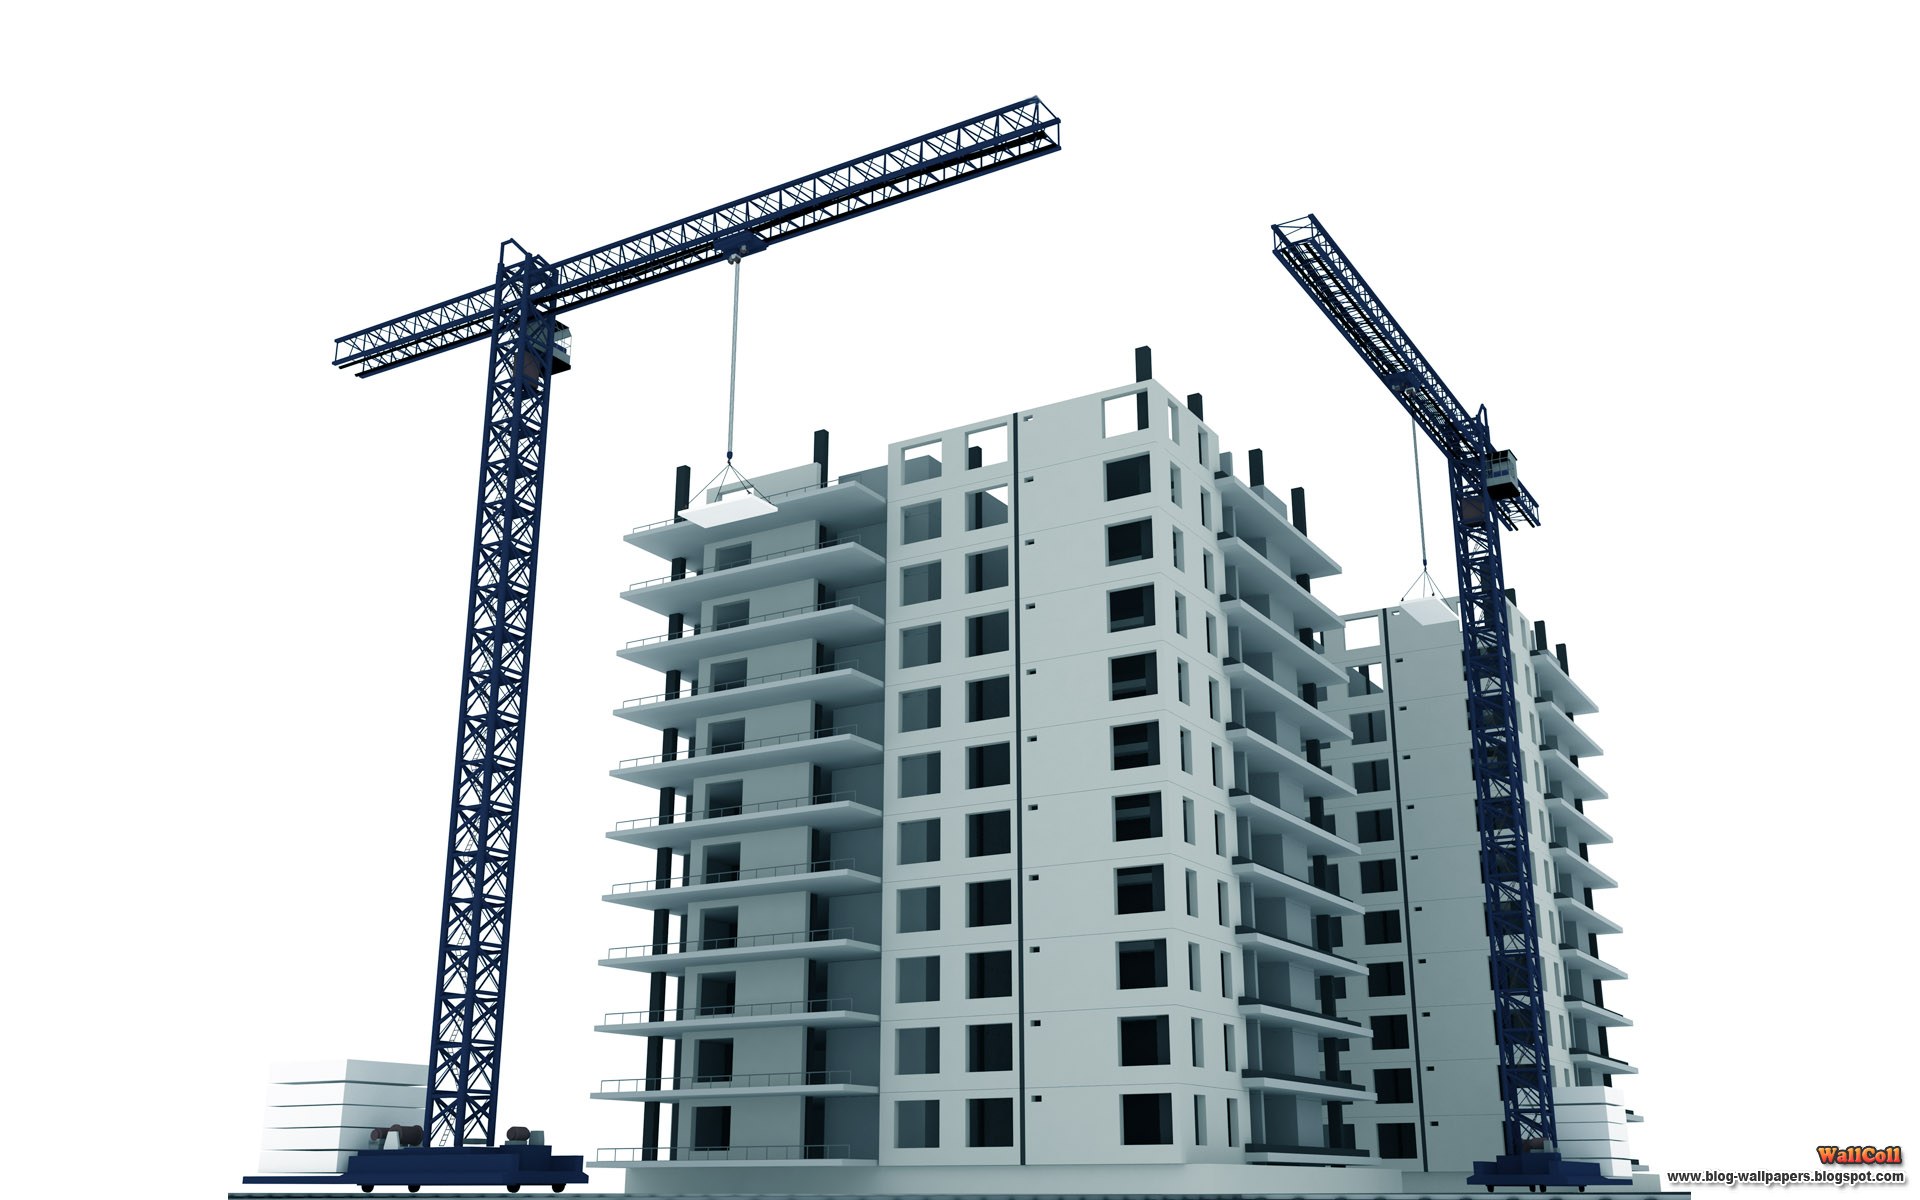 contractor clipart building structure